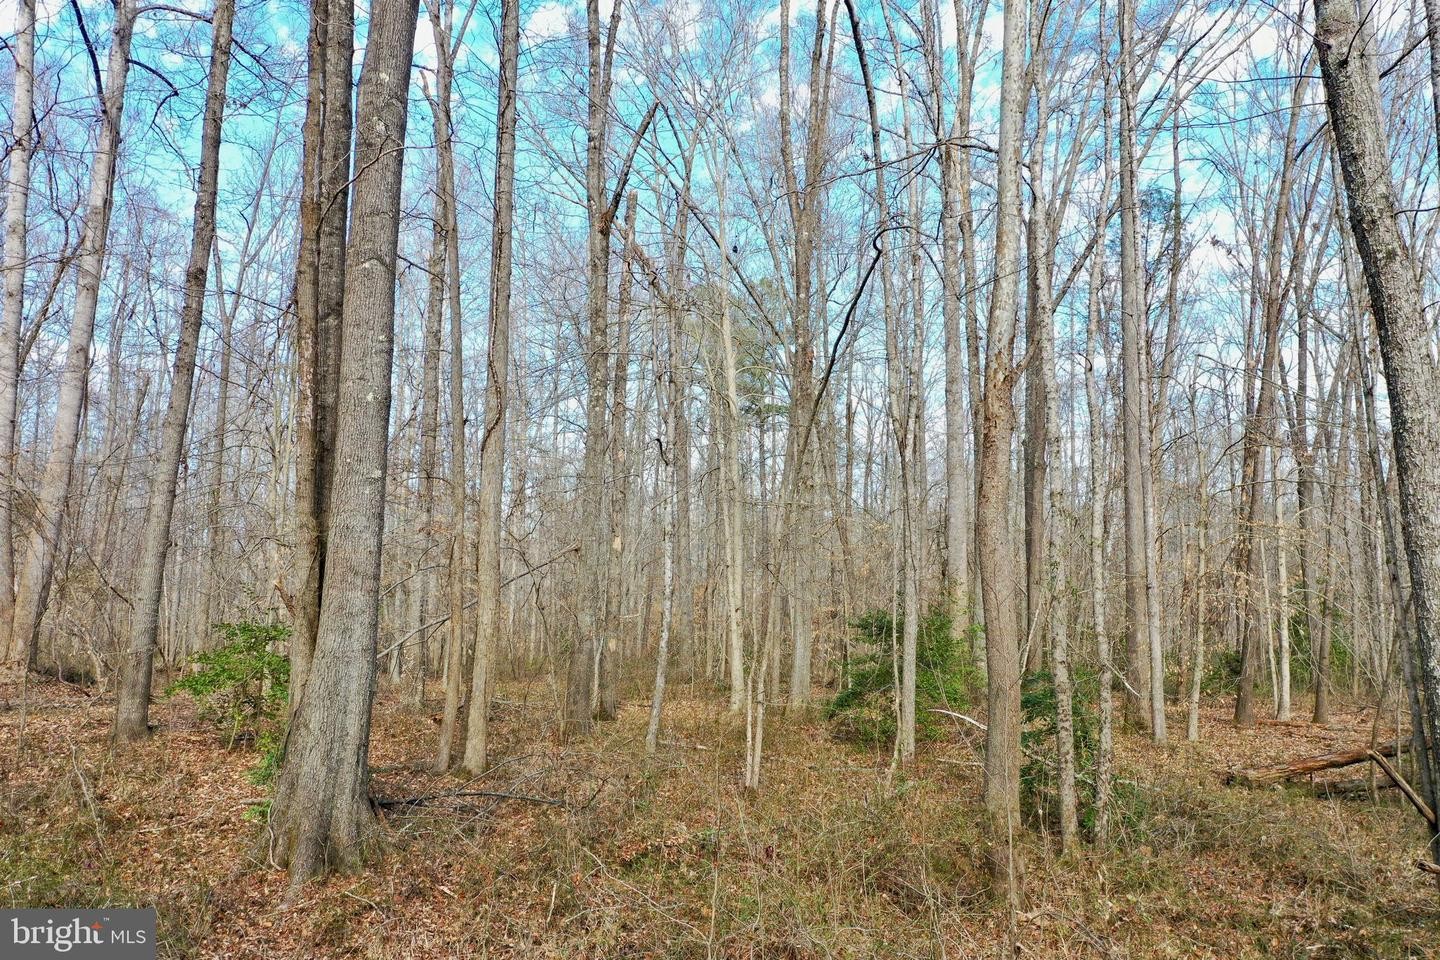 37. Tbd Ancient Acres Rd